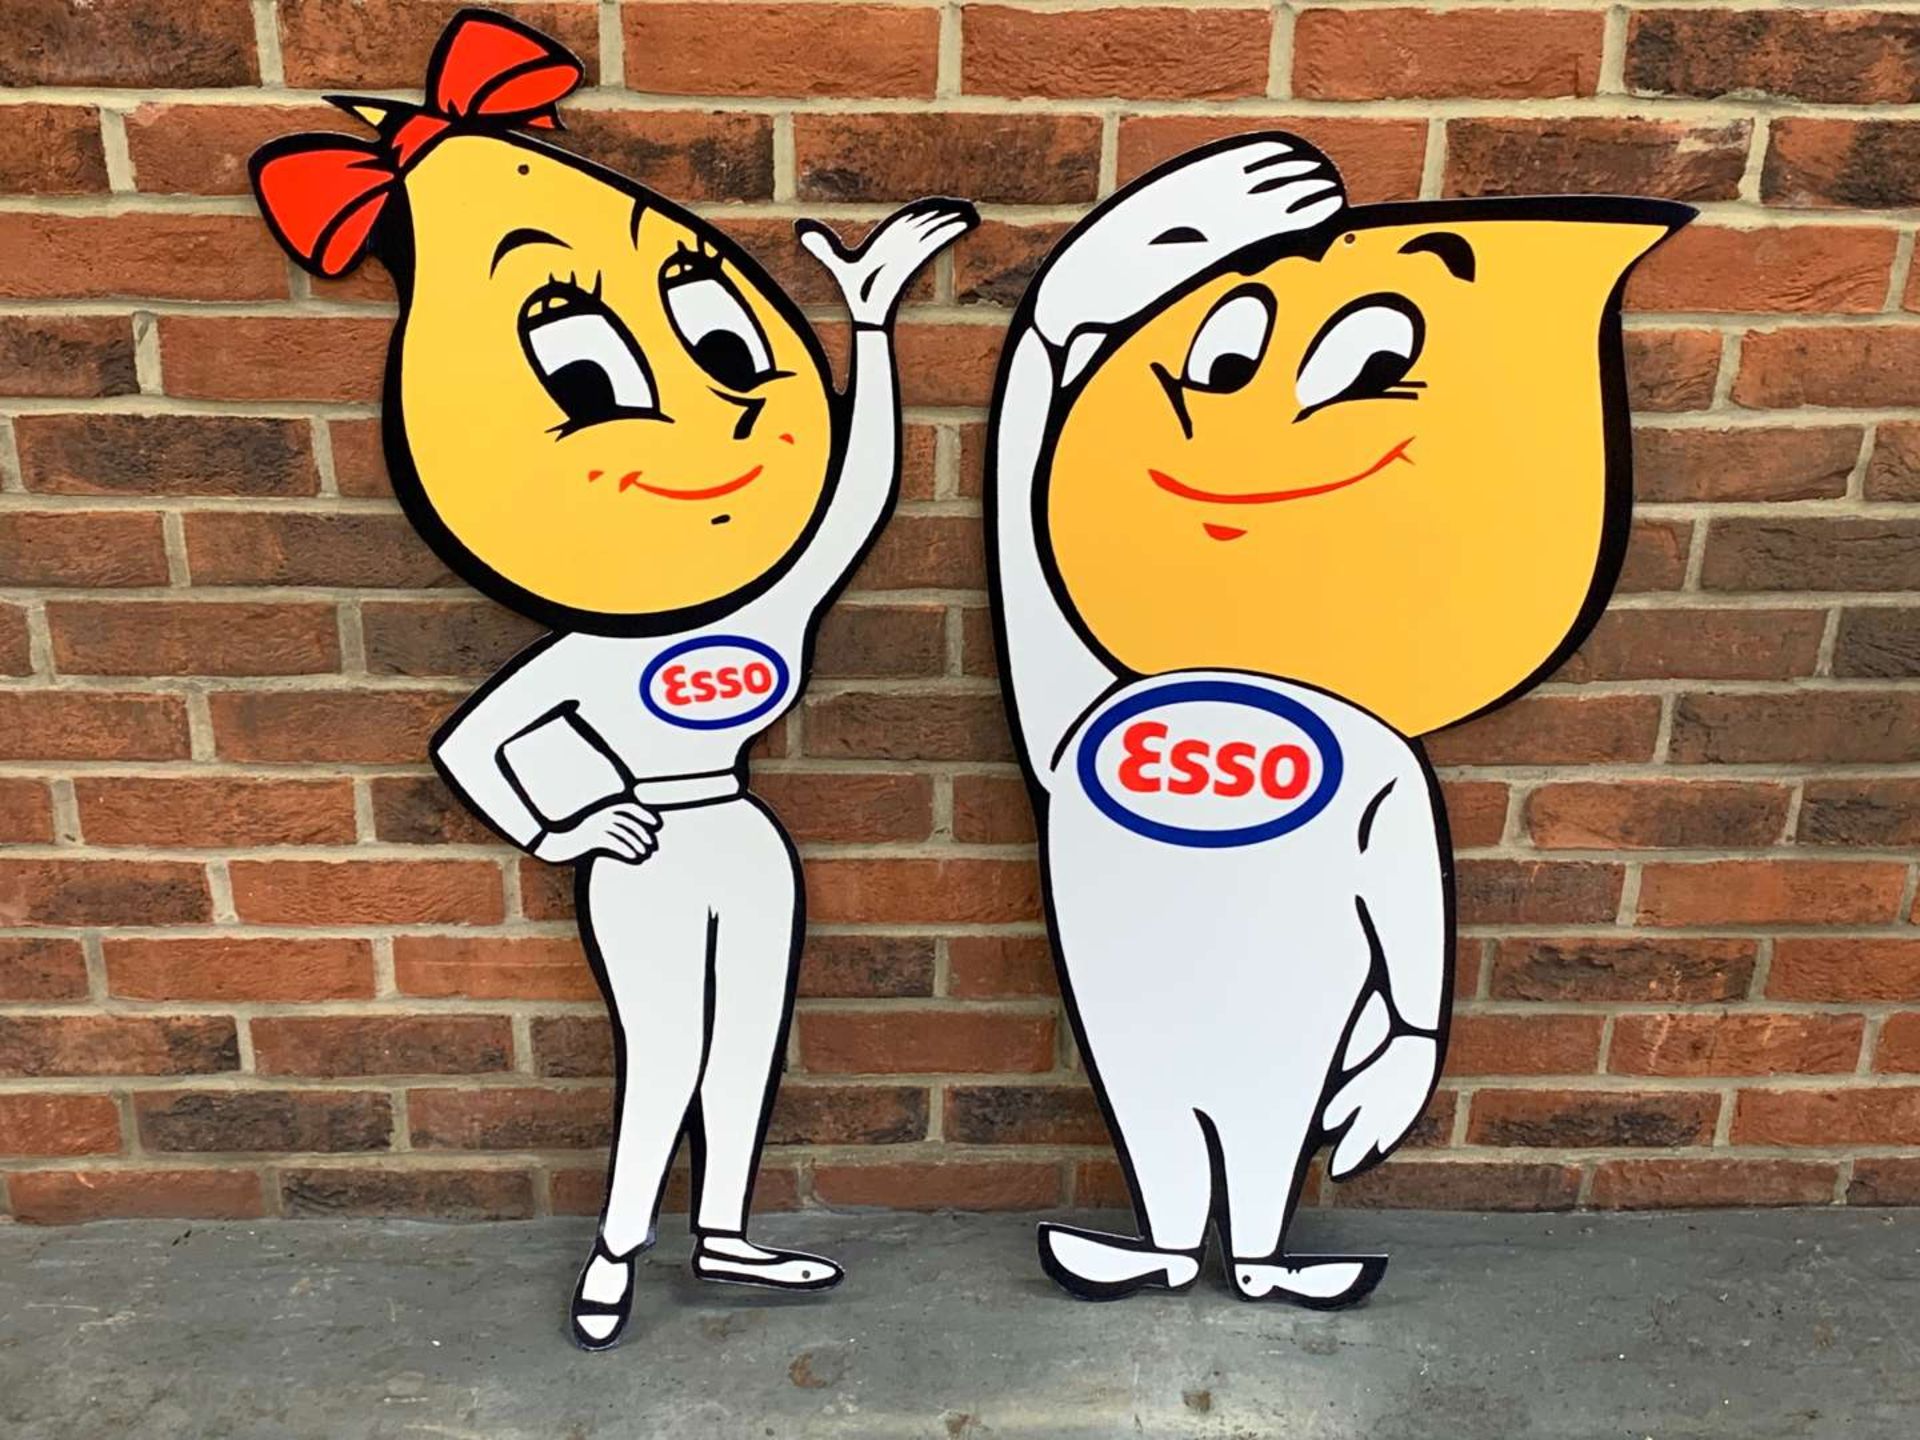 Large Mr and Mrs Drip Metal Signs